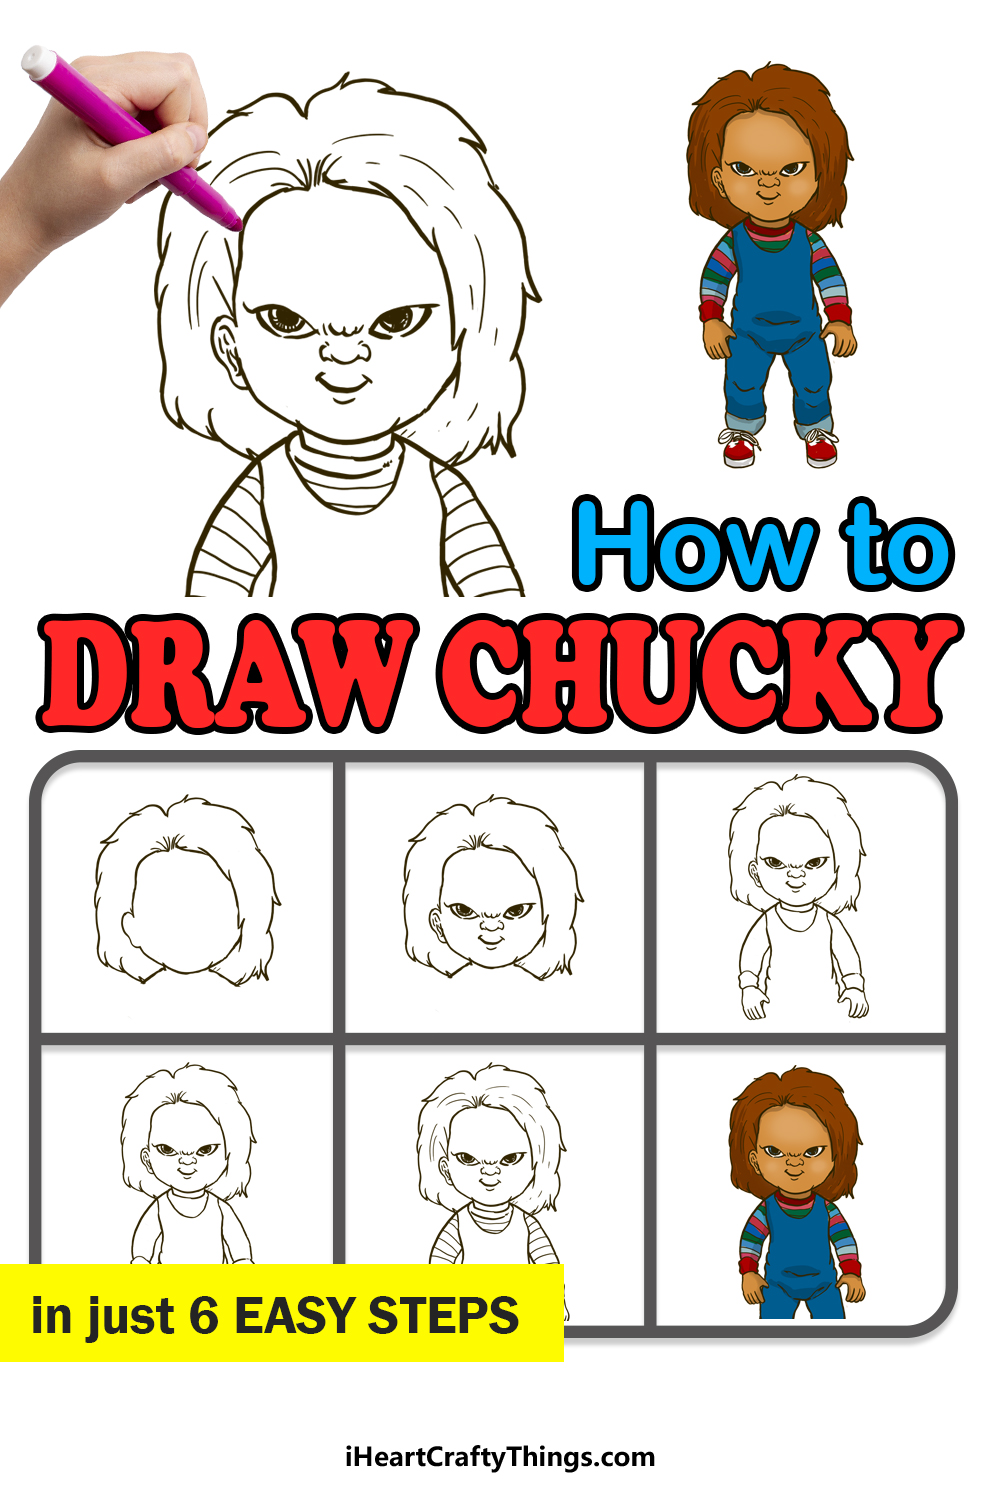 How to Draw Chucky step by step guide